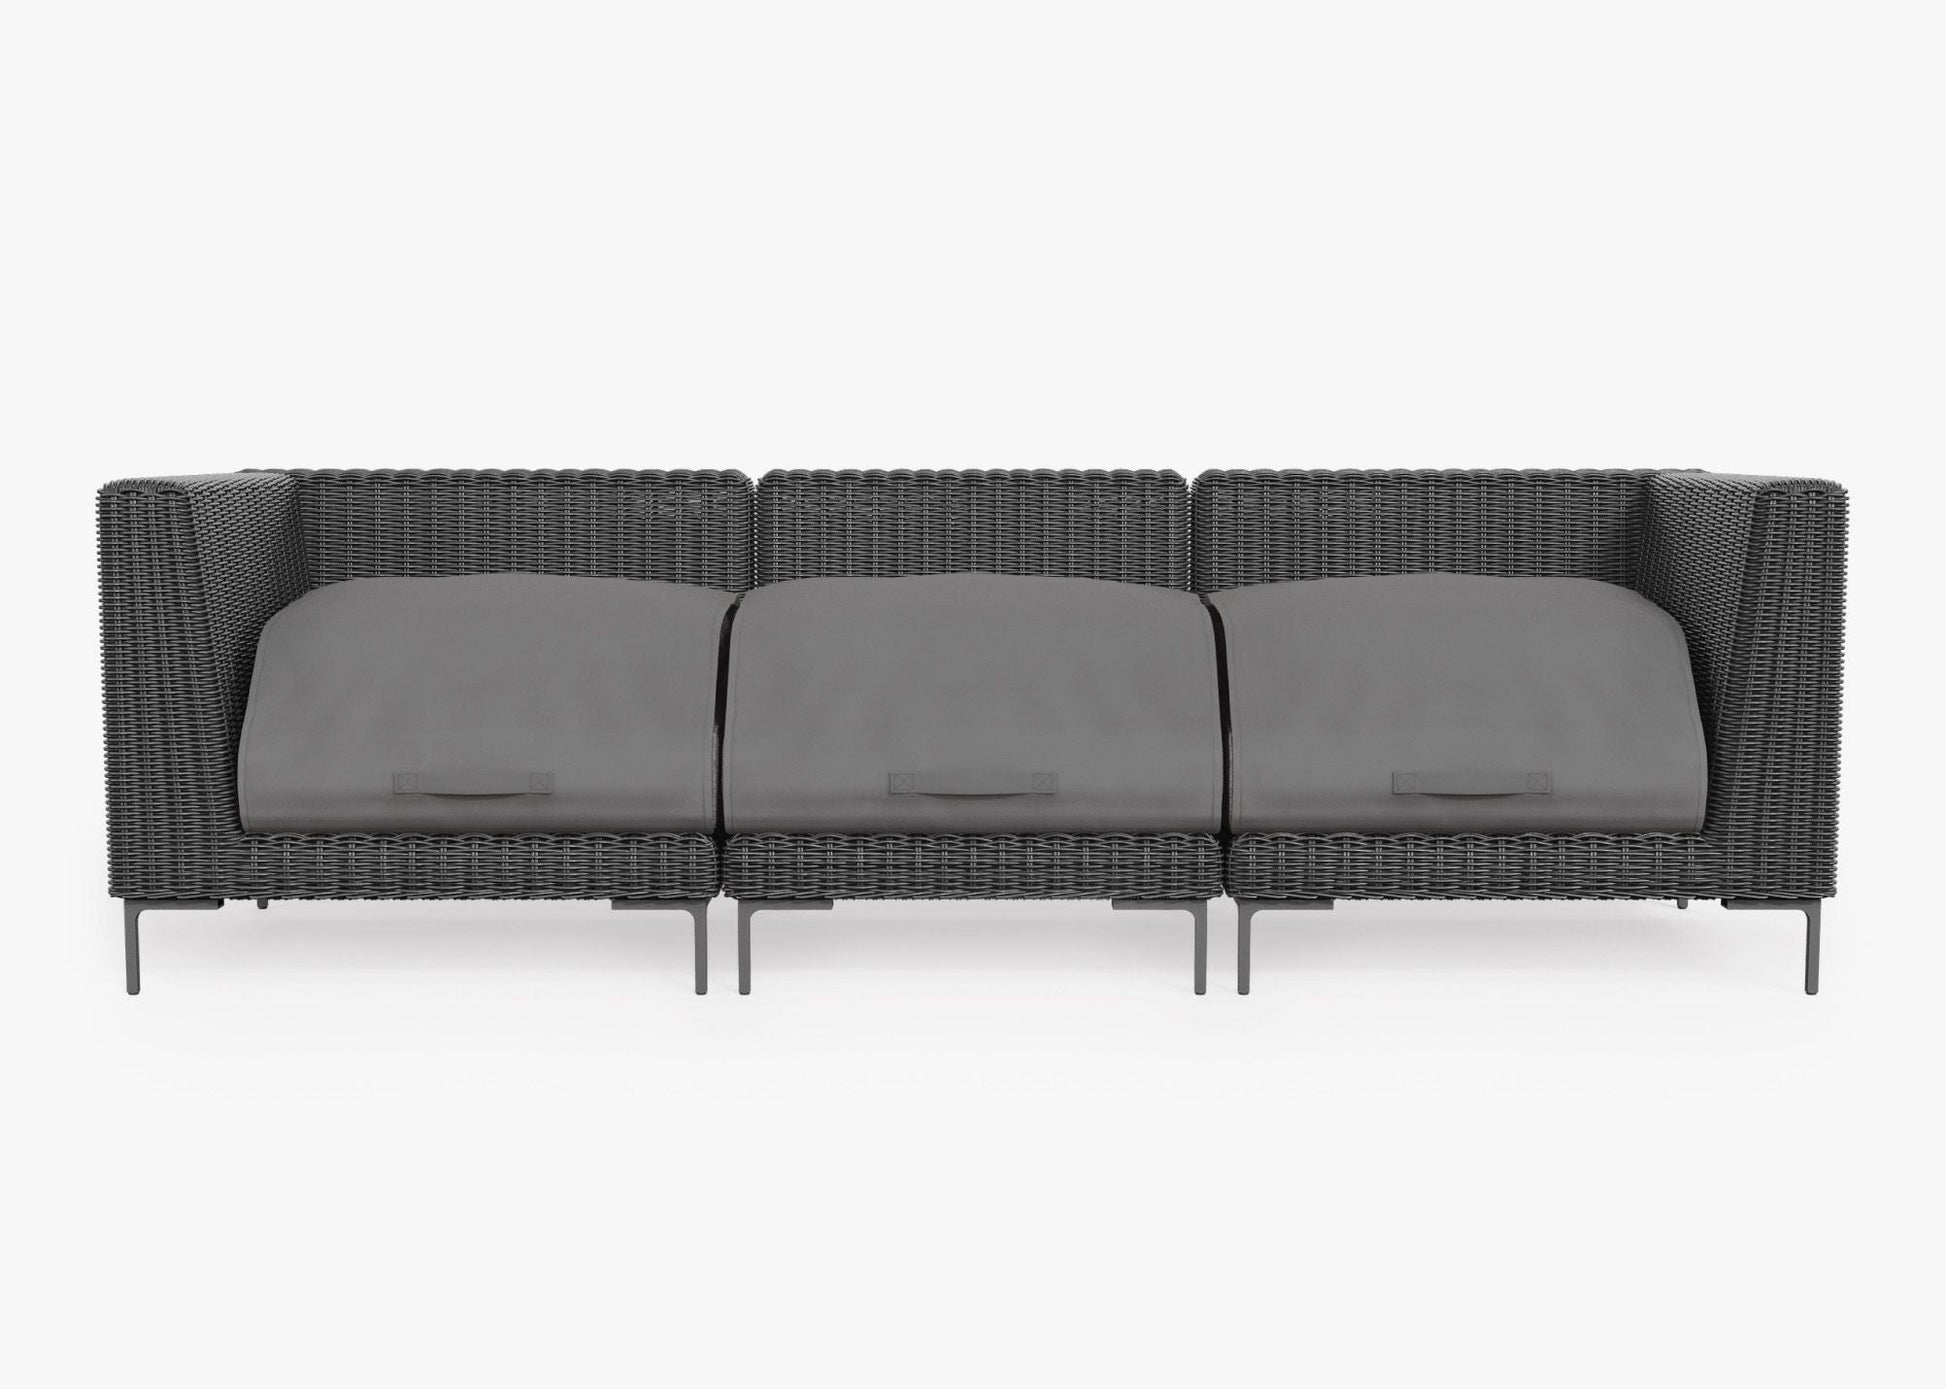 Live Outer 103" Black Wicker Outdoor 3-Seat Sofa With Dark Pebble Gray Cushion